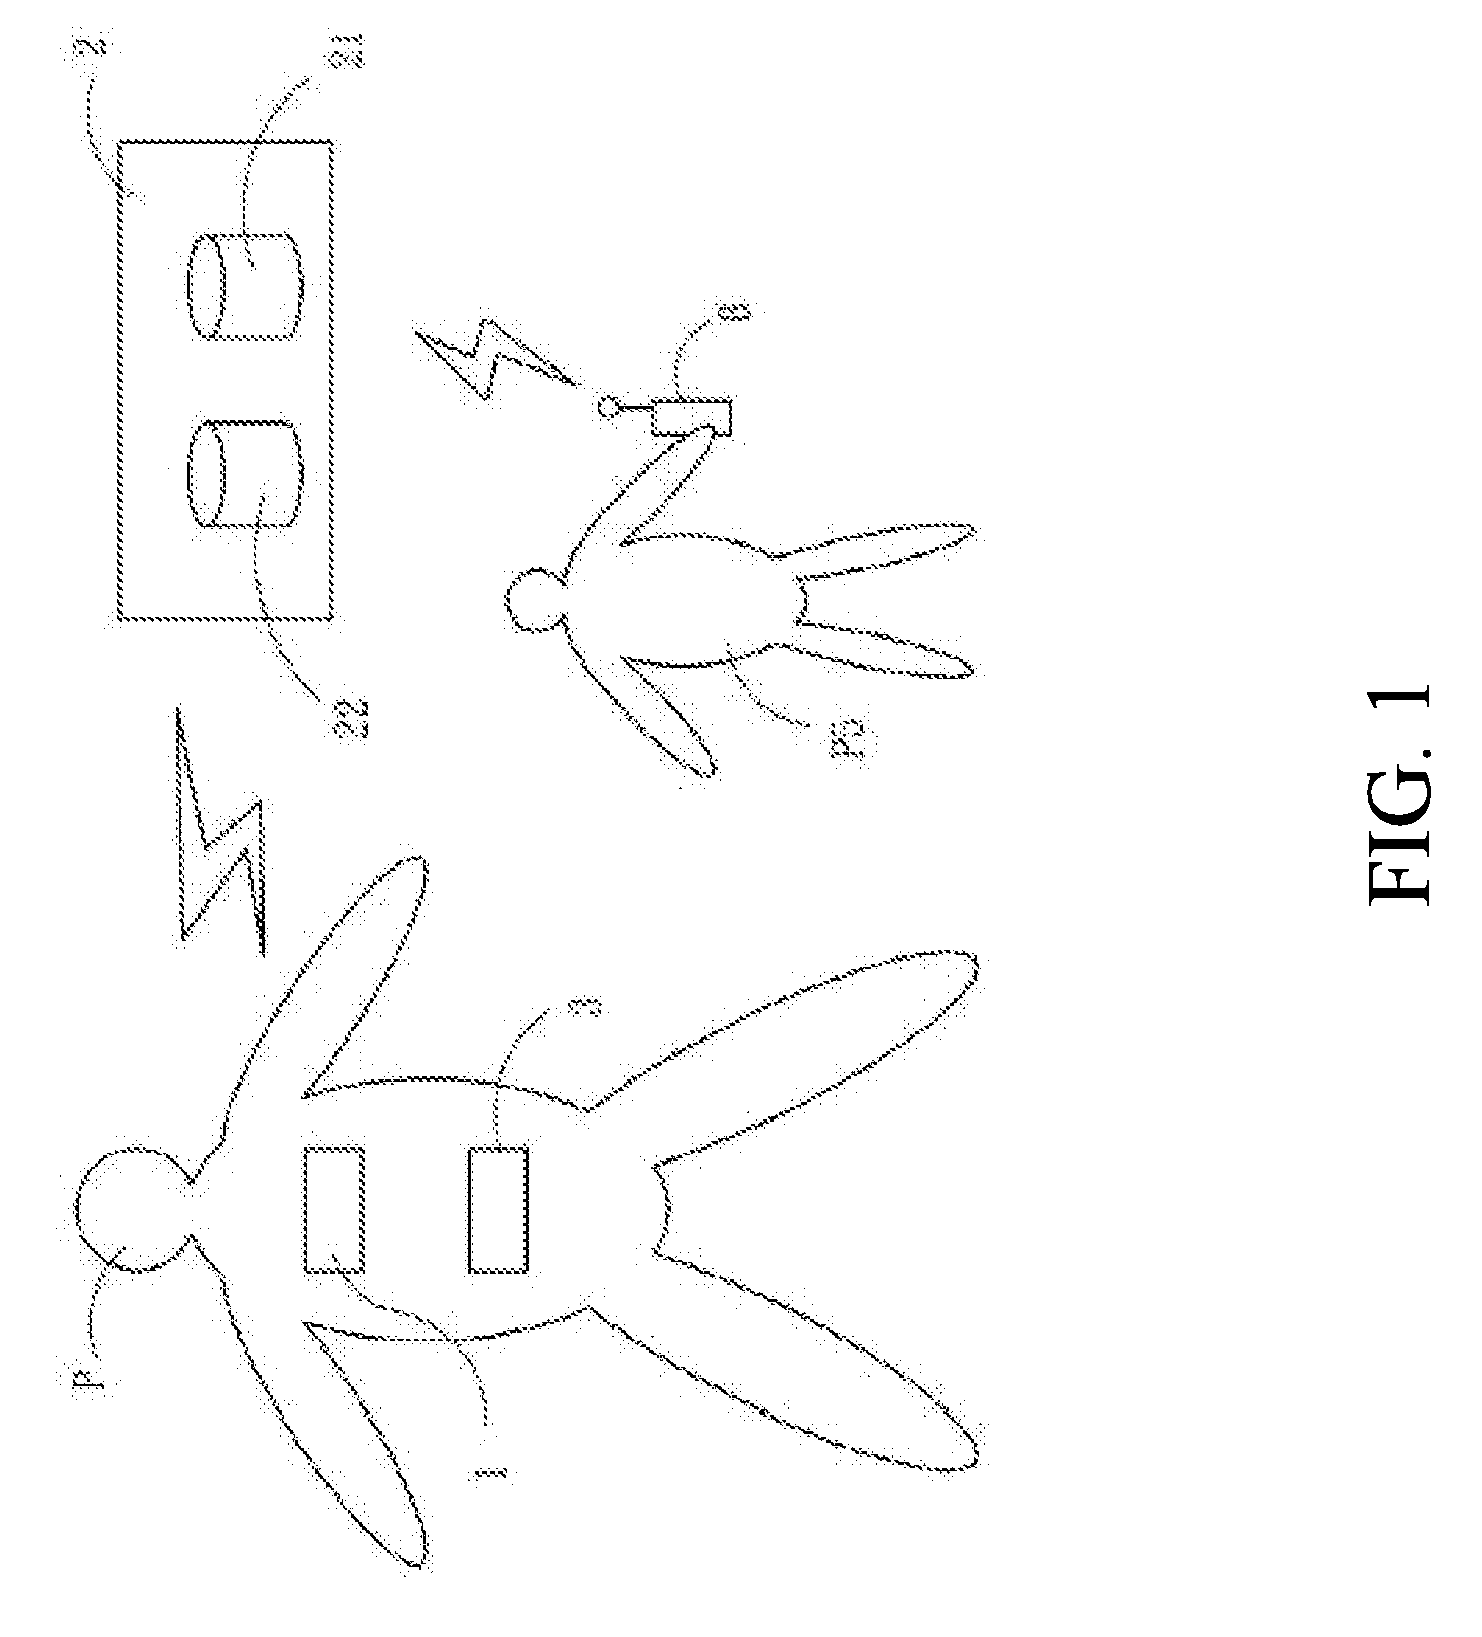 Method and Apparatus for Monitoring Body Temperature, Respiration, Heart Sound, Swallowing, and Medical Inquiring